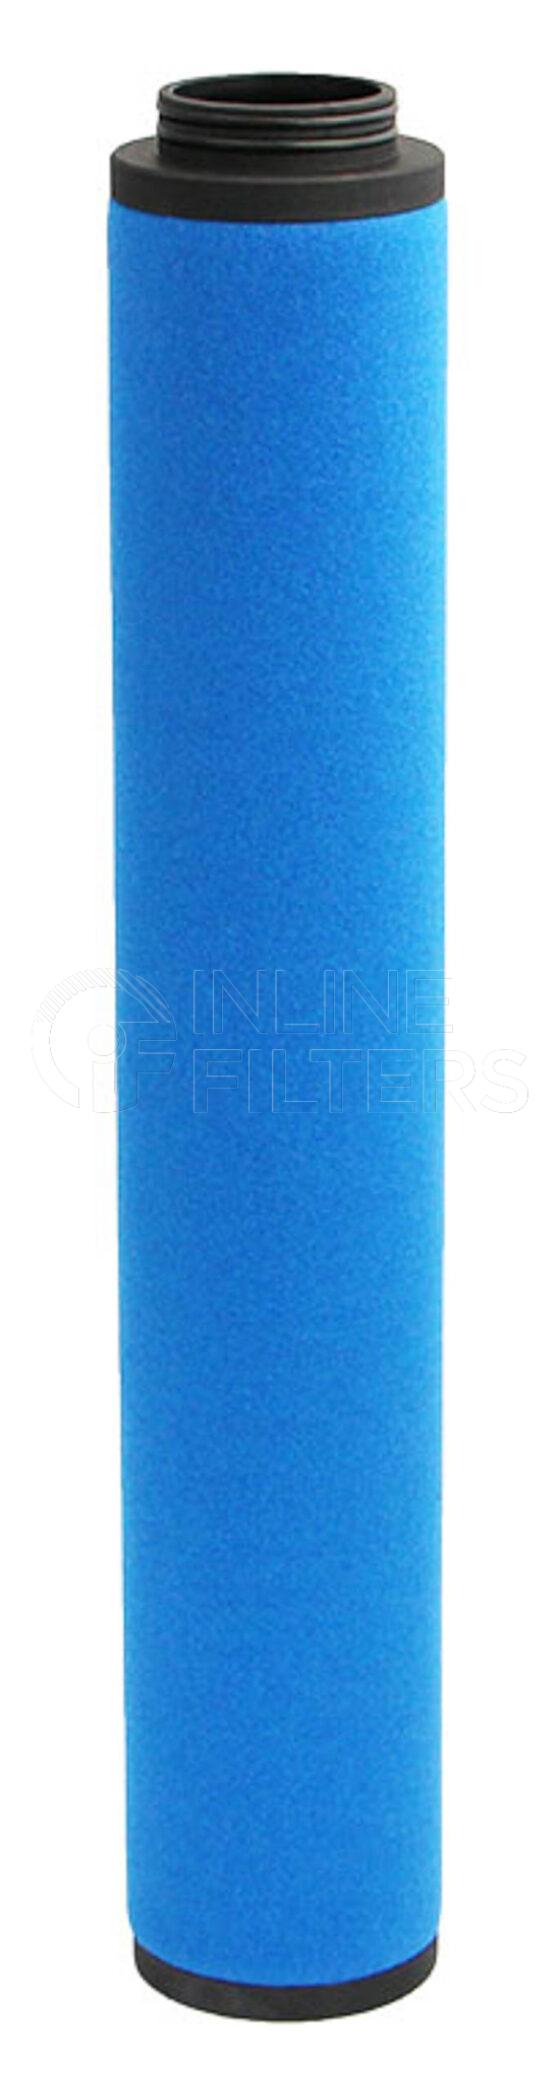 Inline FA13373. Air Filter Product – Compressed Air – Cartridge Product Air filter product